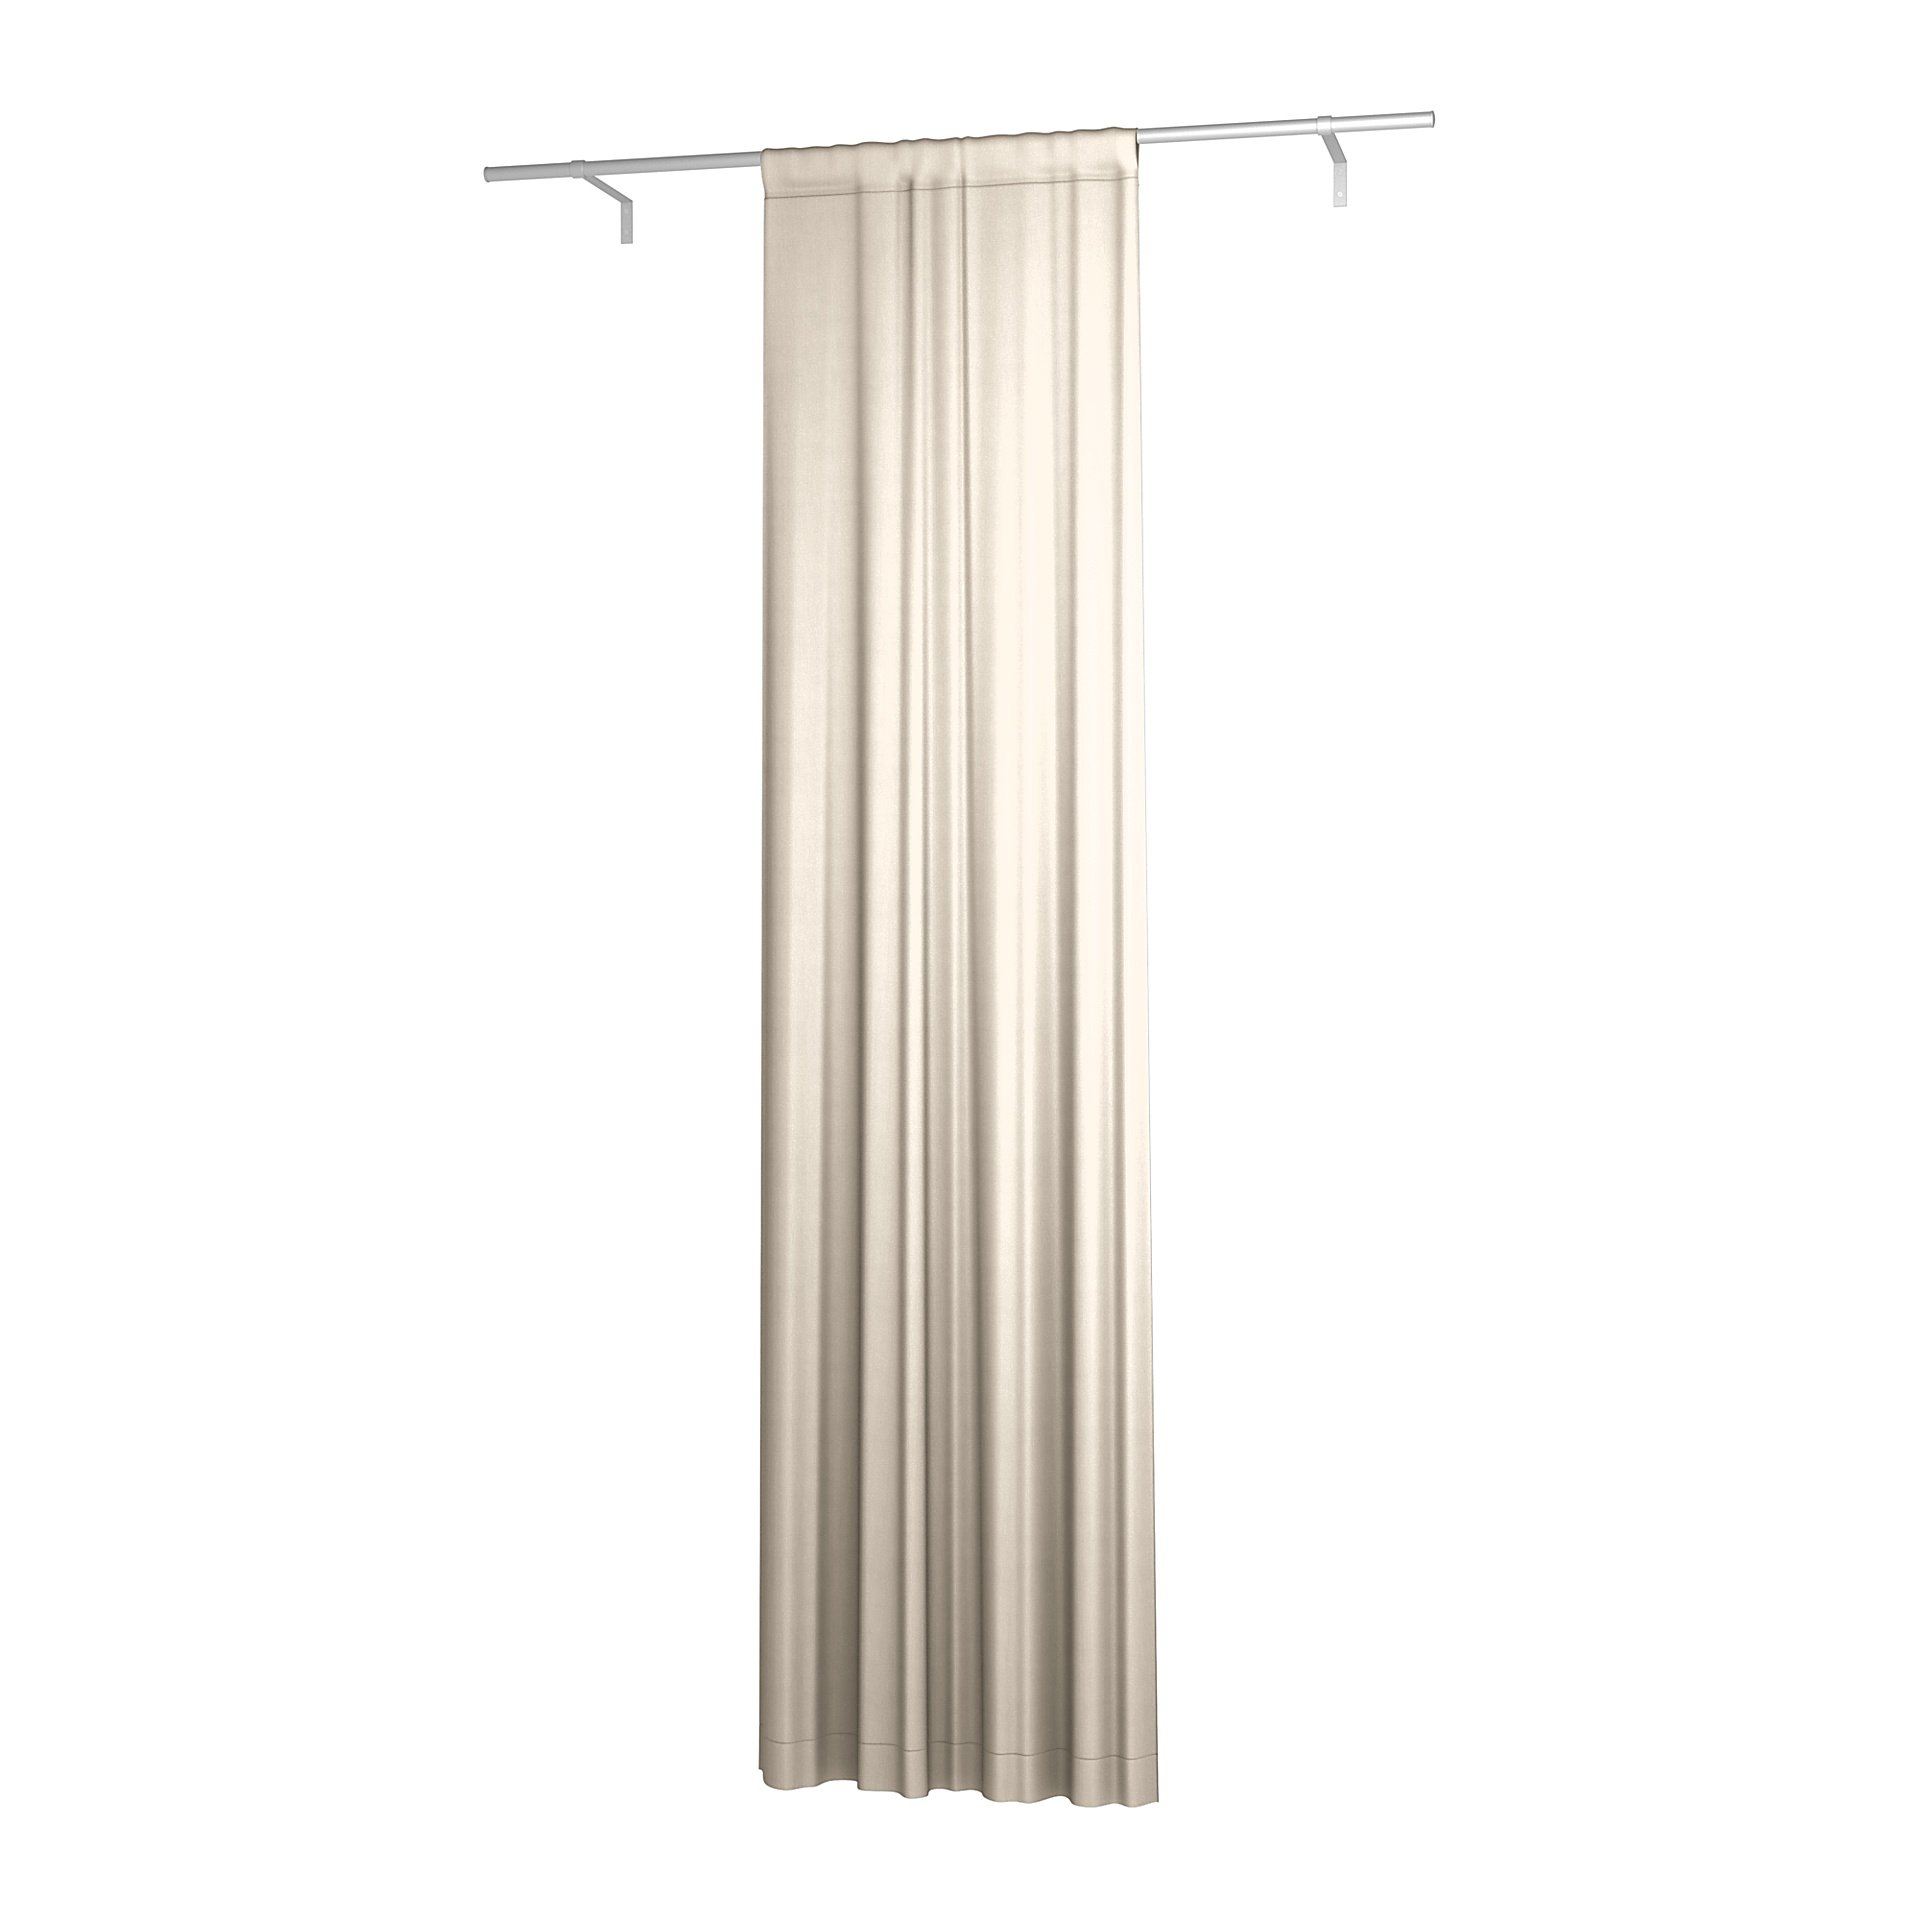 Single Width Curtain Panel with Tunnel/Creaseband, 250 cm, Parchment, Linen - Bemz